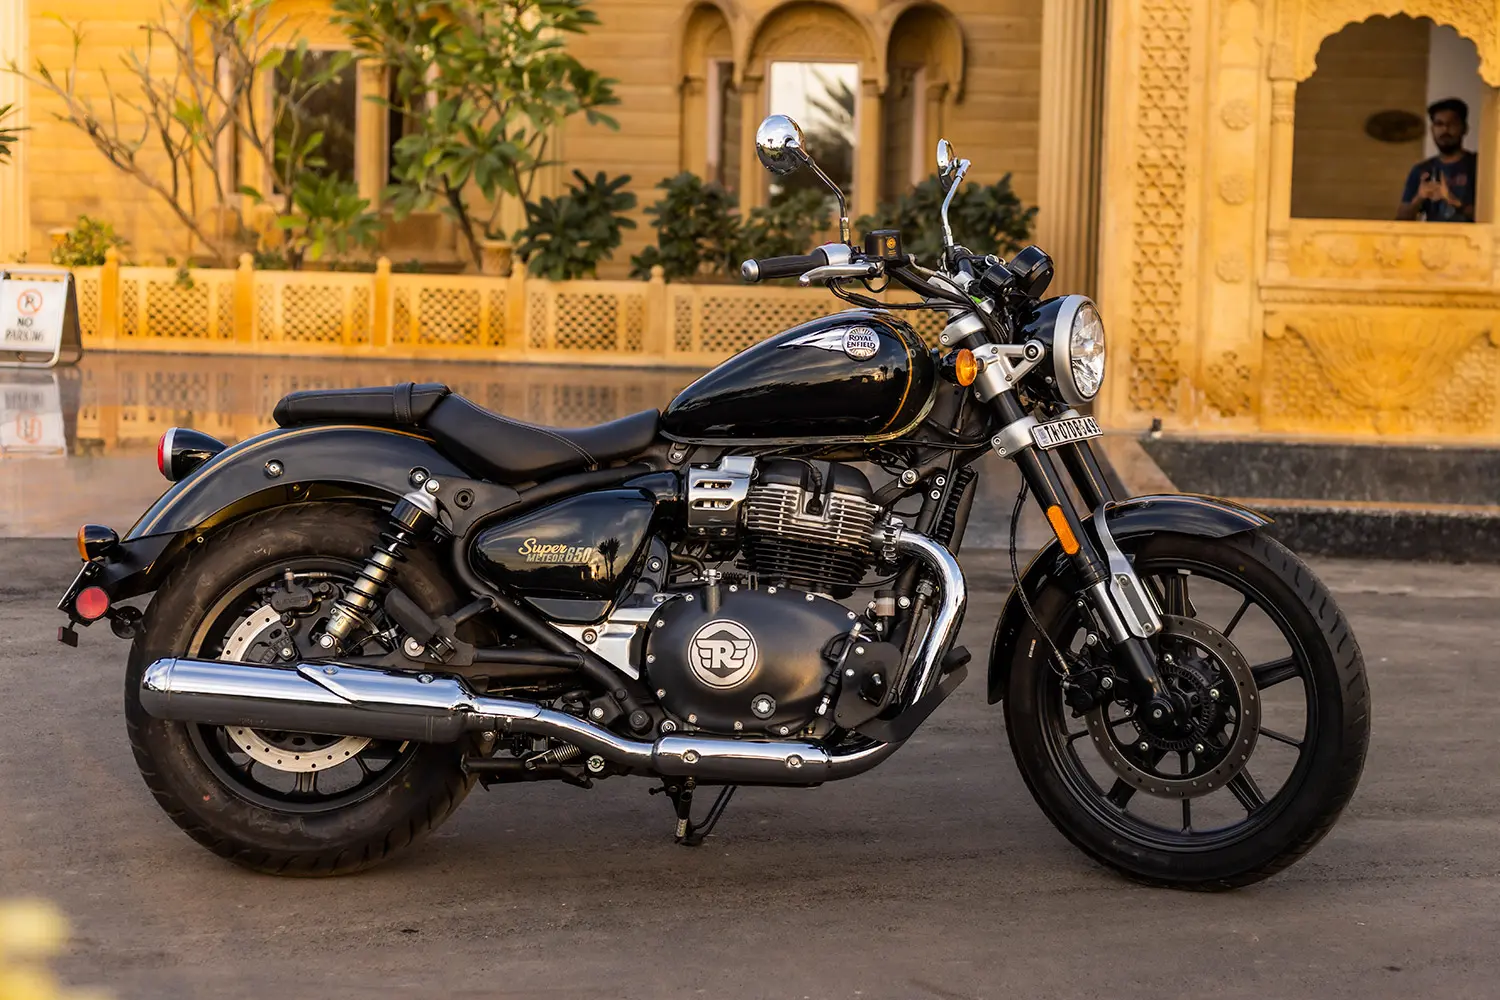 Royal Enfield Super Meteor 650 Review, Price, Specs and Features